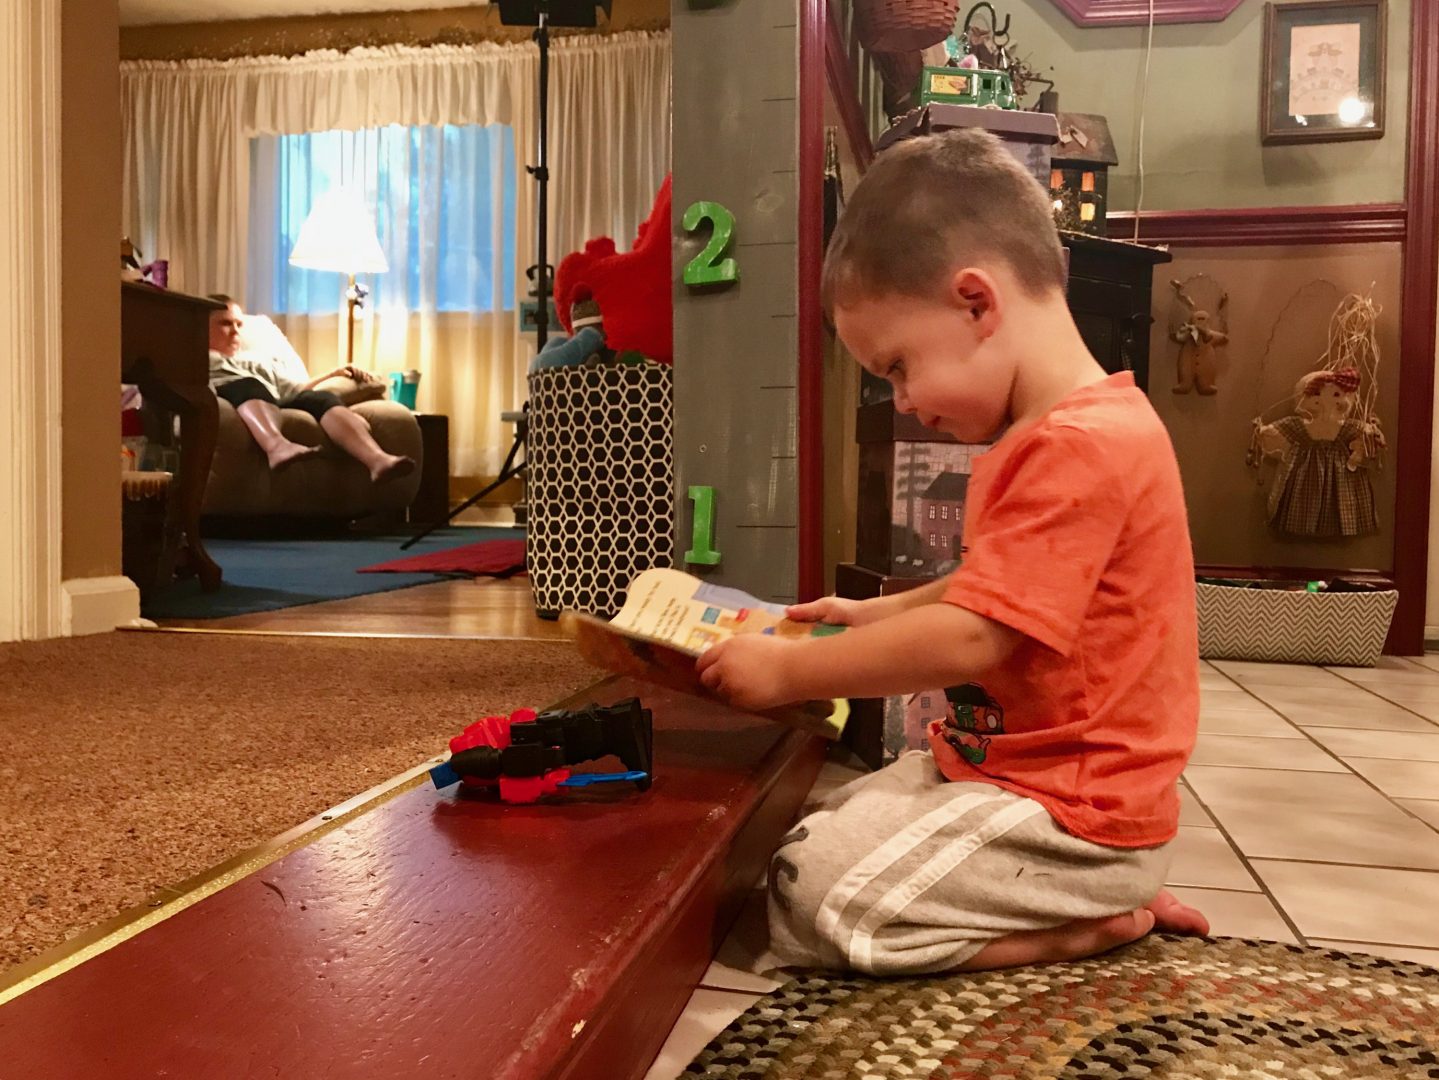 Carson Cox reads a book on the floor of his grandmother's home in Middletown. His mother, Elizabeth Loranzo, died of an overdose in 2017.